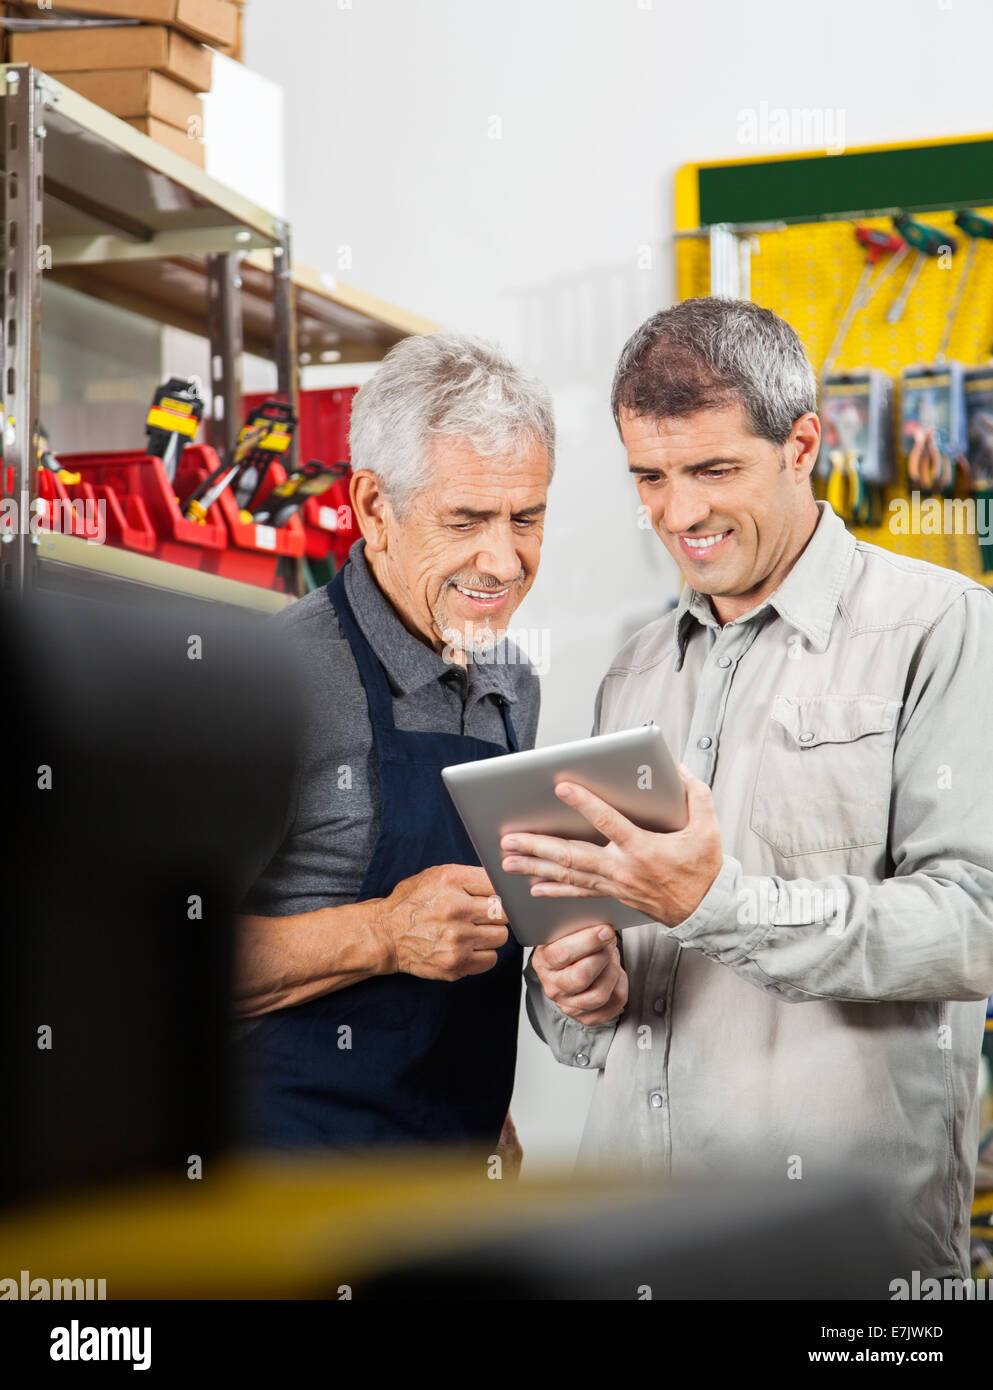 Salesperson And Customer Using Digital Tablet Stock Photo